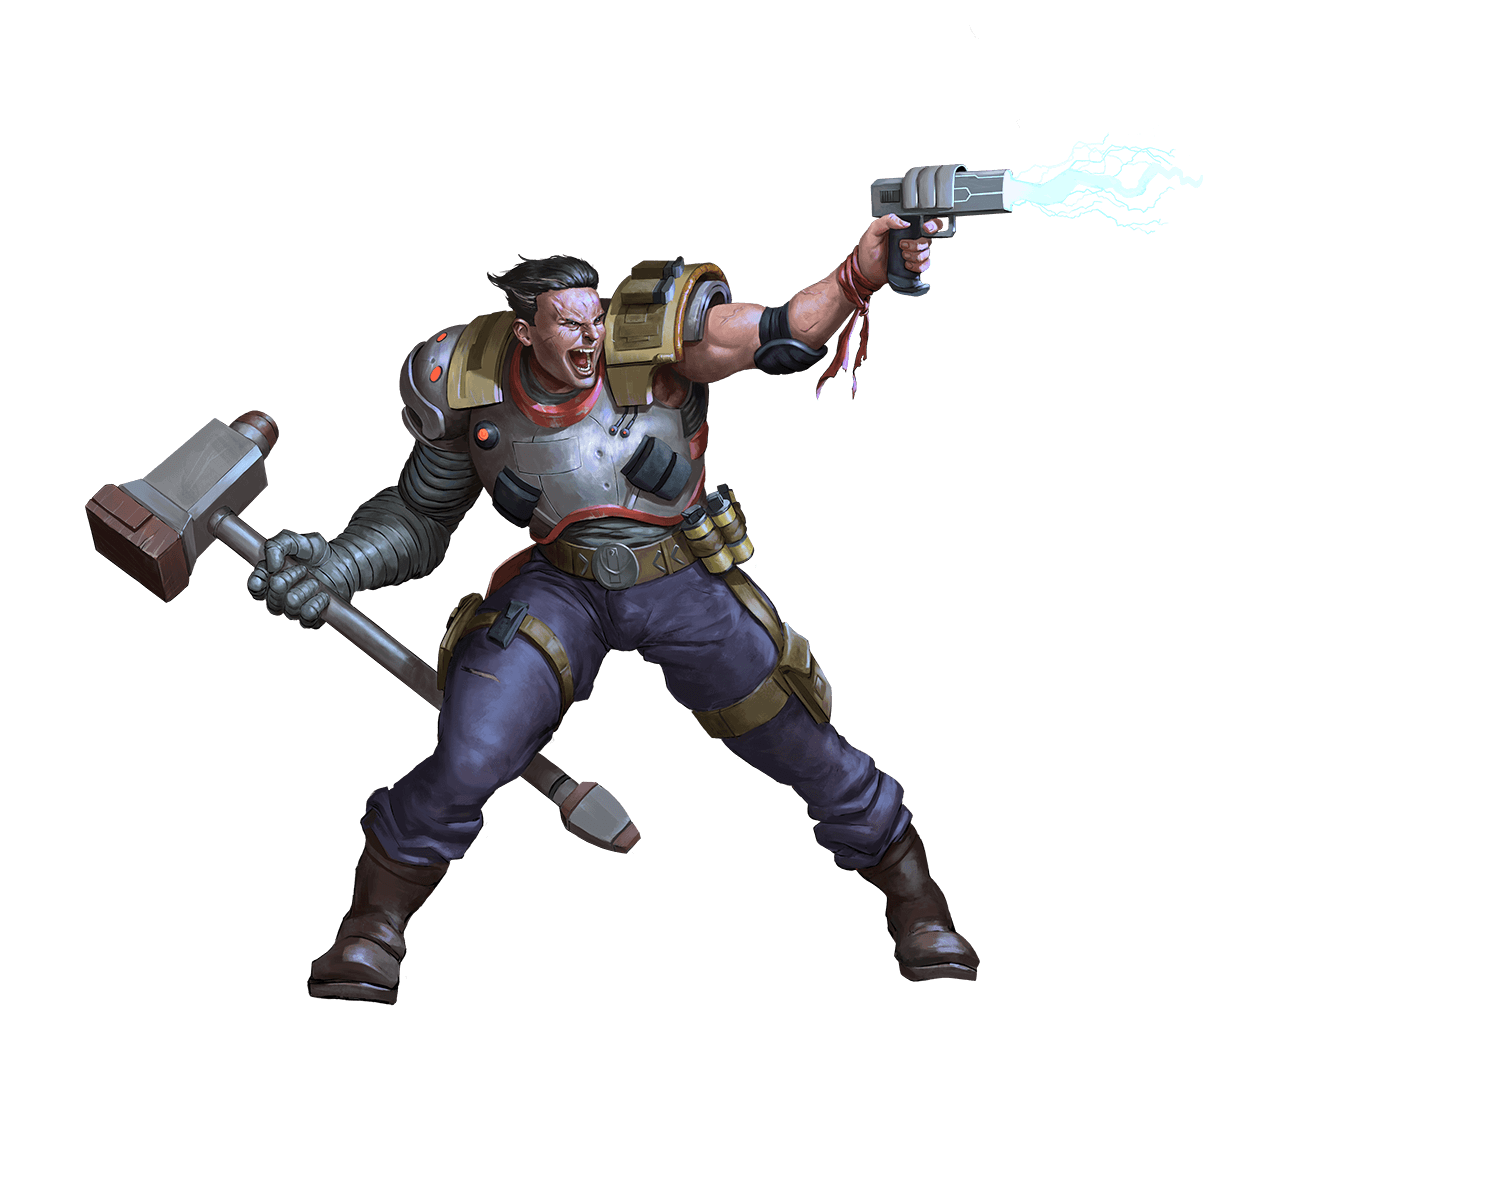 A heavily armed human man fires a lightning pistol, while holding a heavy hammer in the other hand. He was definitely not invited. 